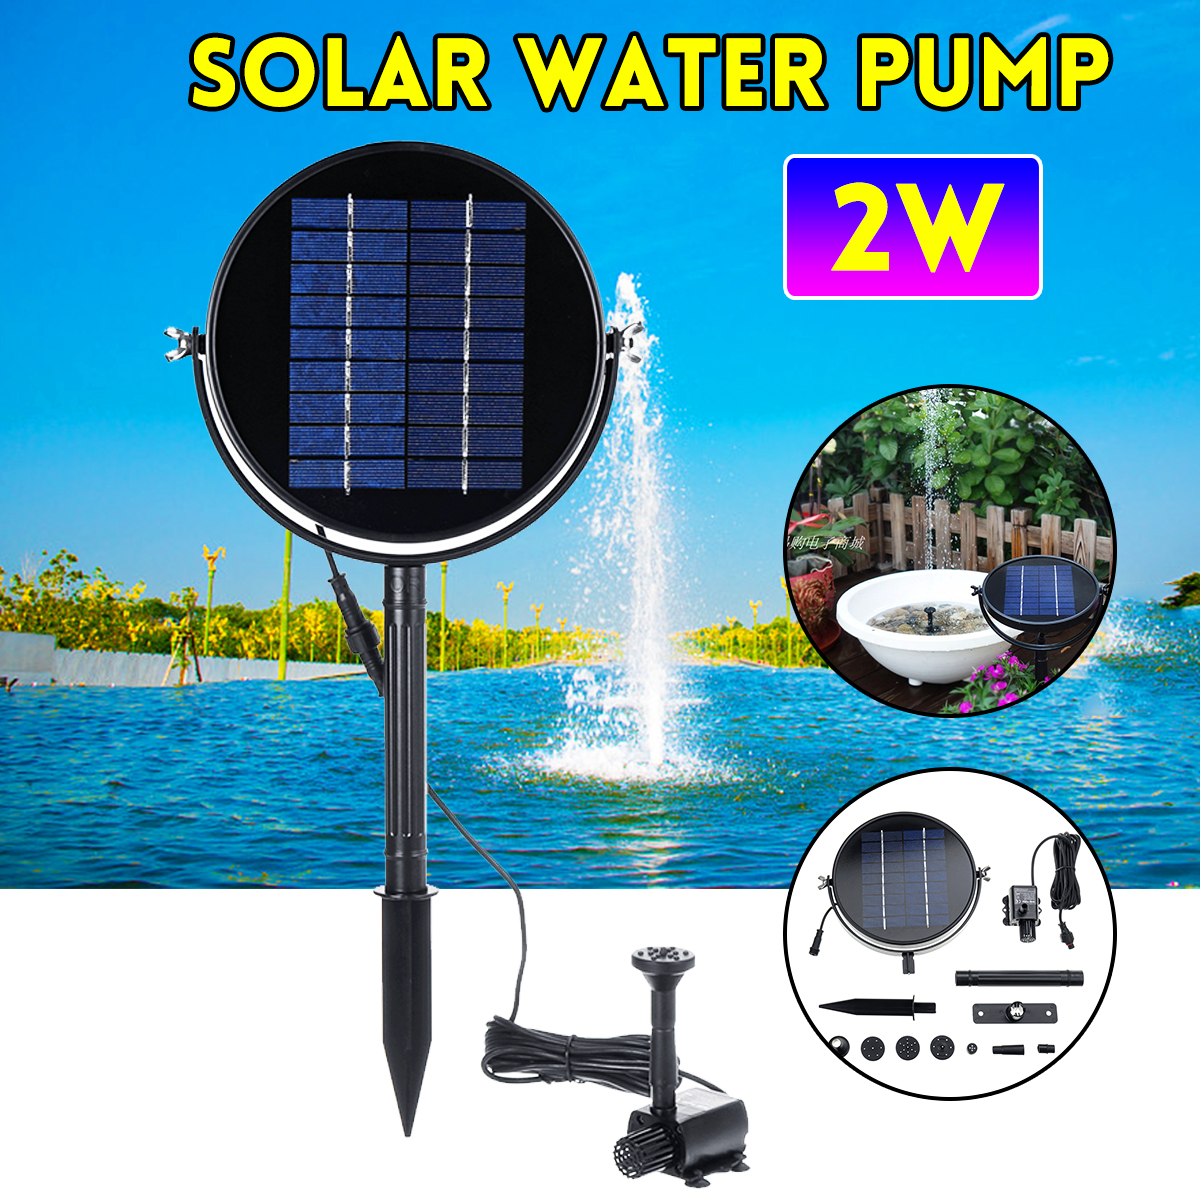 9V-2W-190LH-Solar-Power-Panel-Water-Pump-Ground-Water-Pool-Floating-Fountain-1543612-2